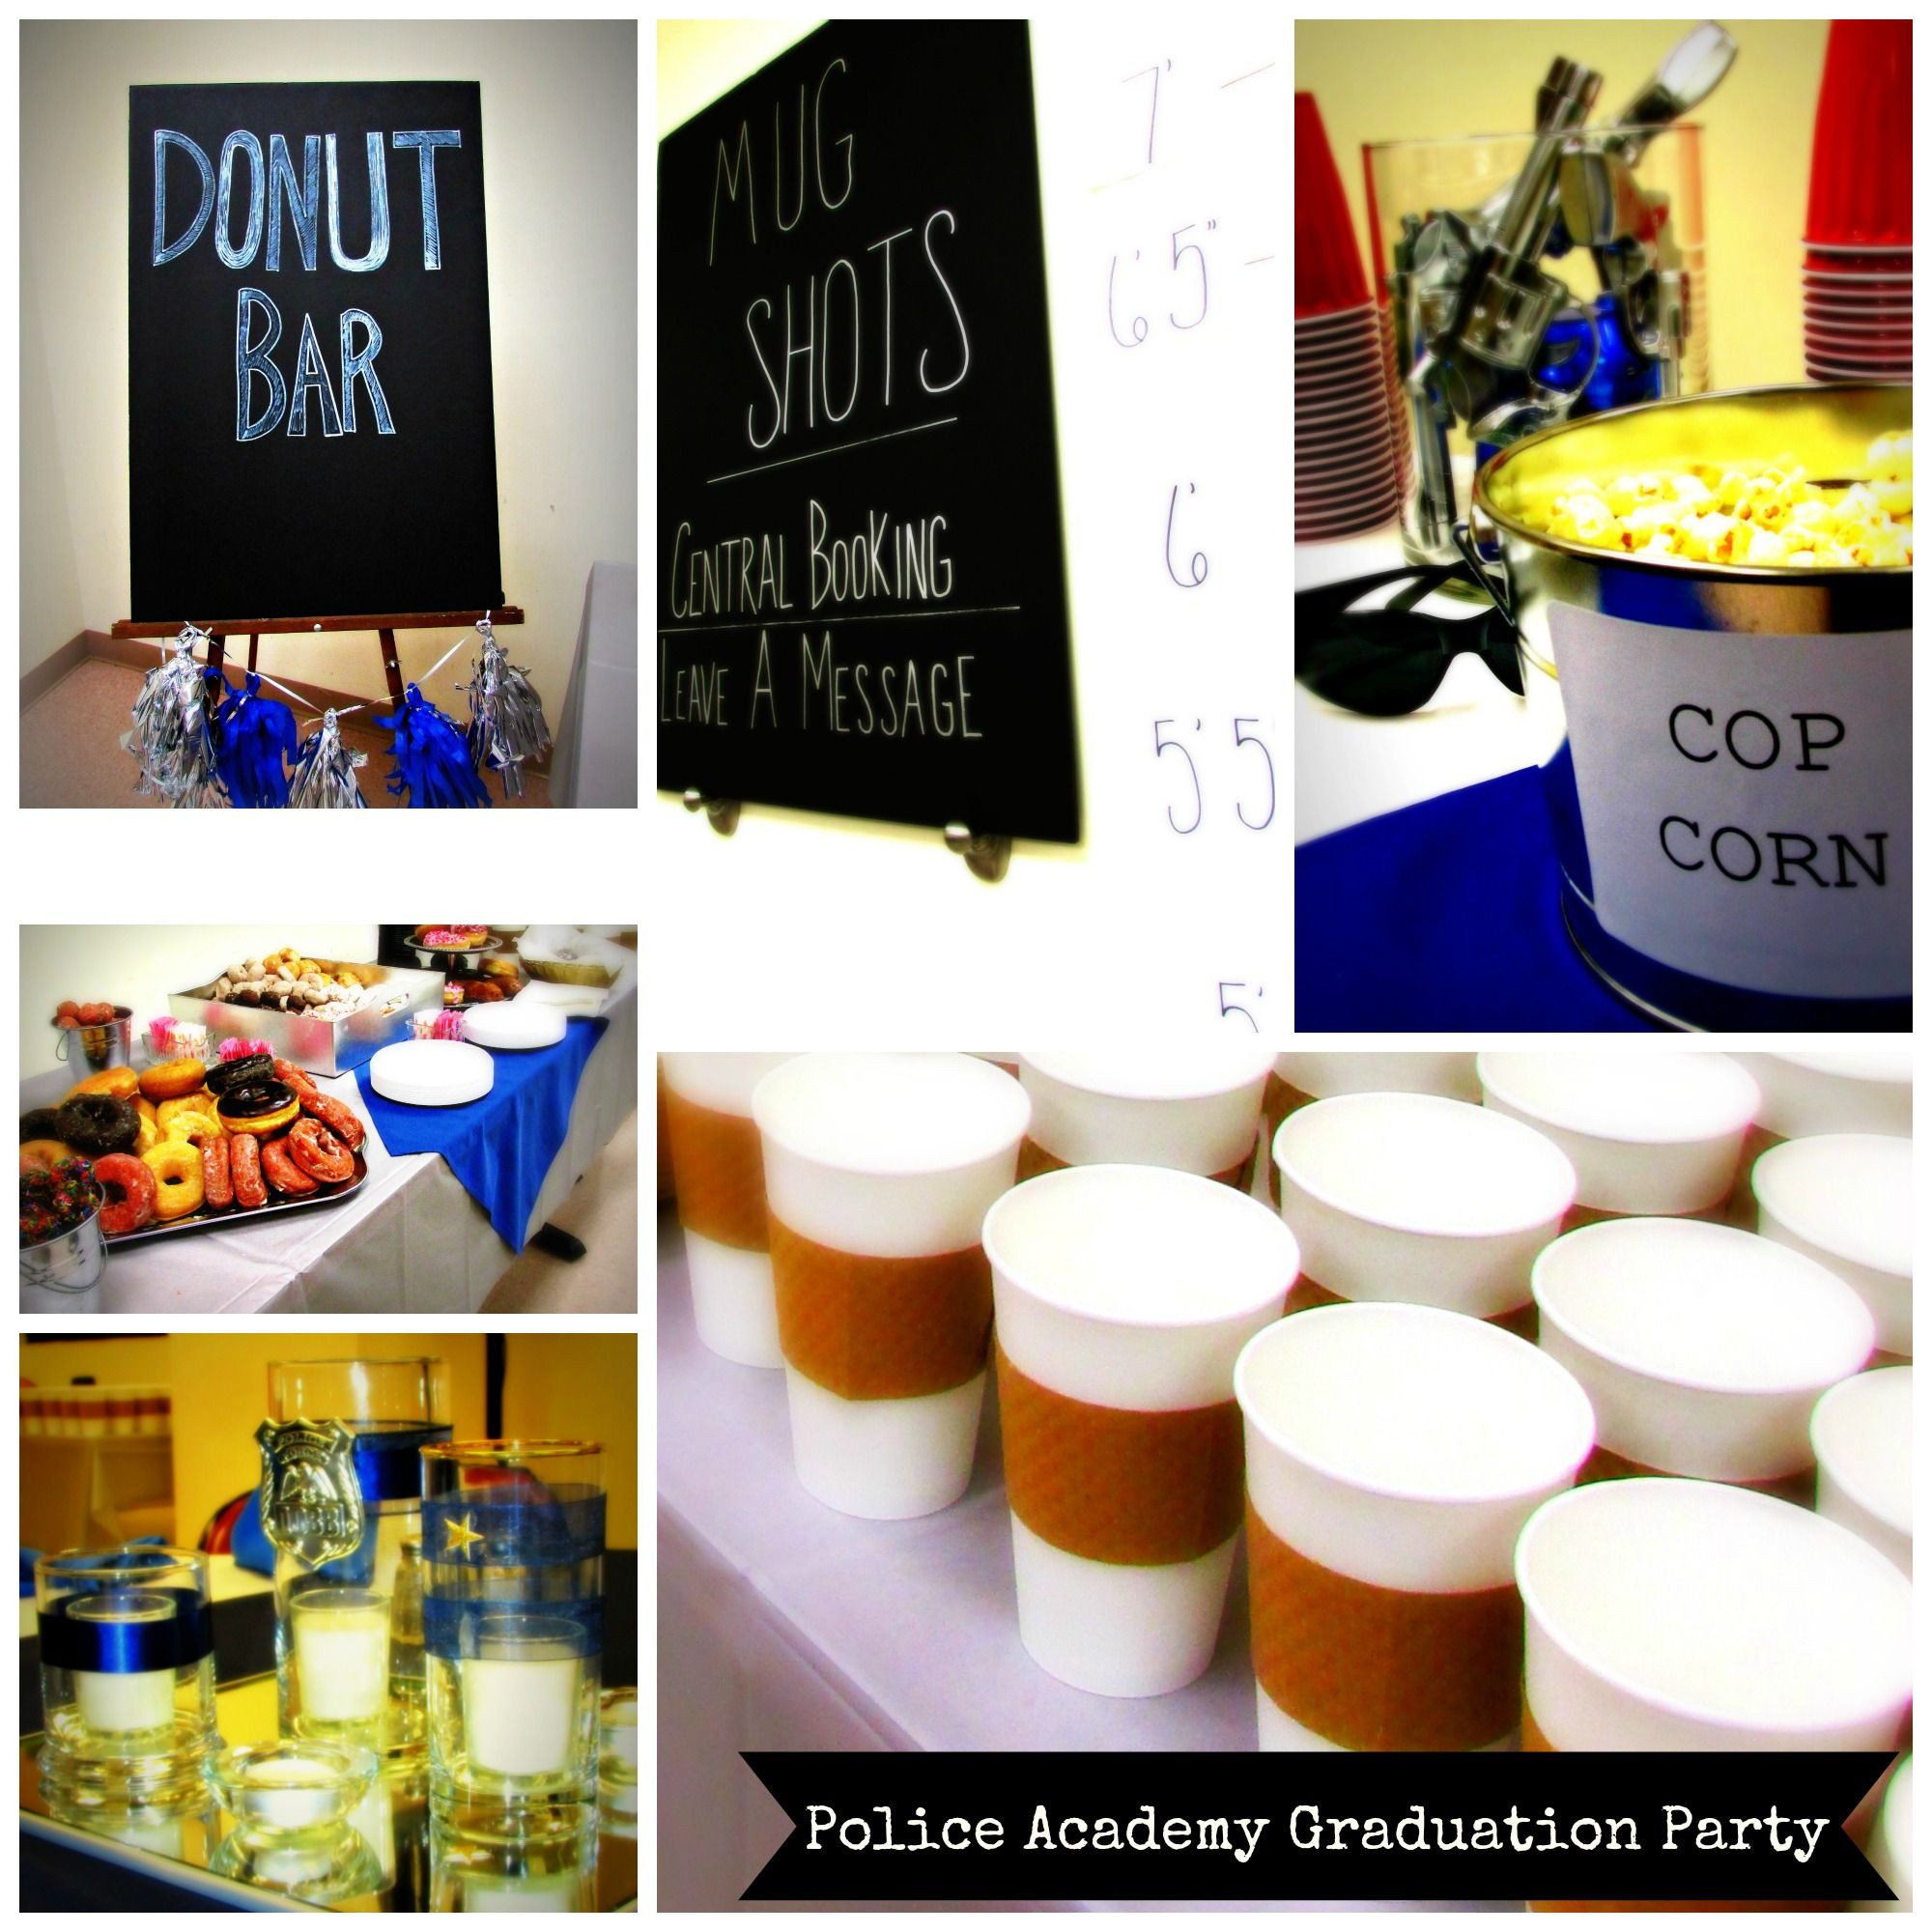 Police Academy Graduation Party Ideas
 24 hours and dollar store resources James Police